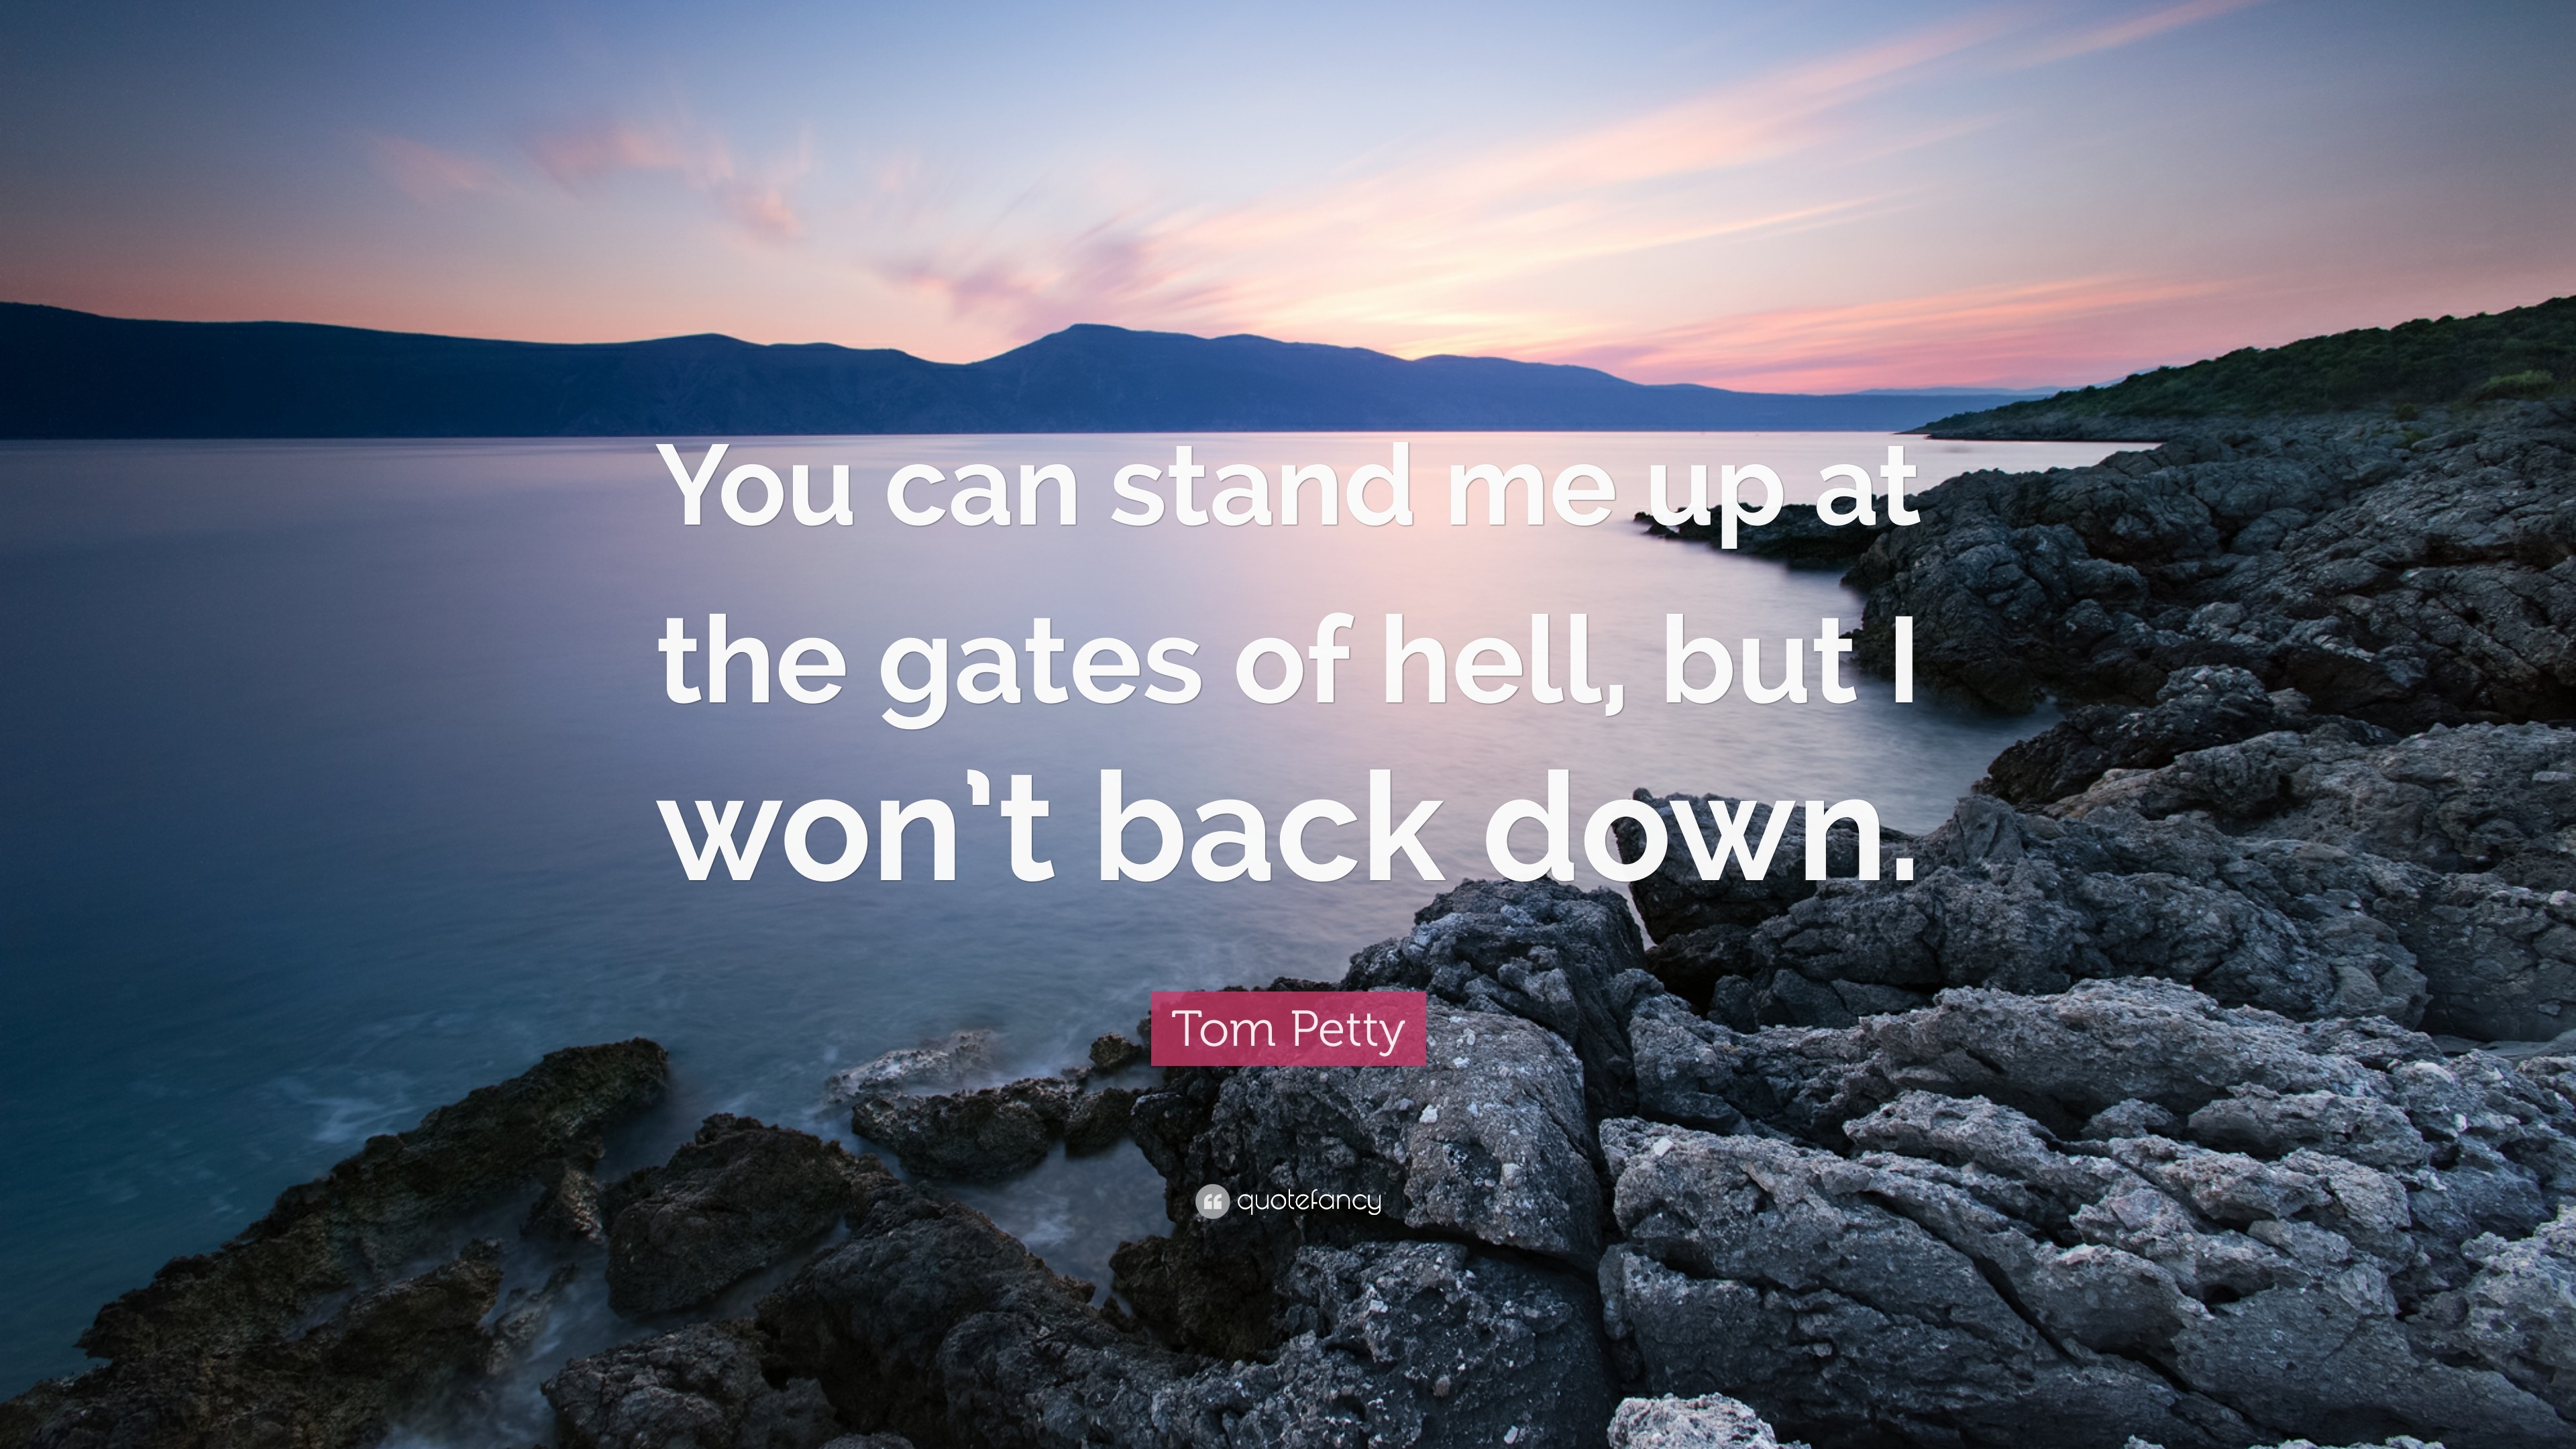 3840x2160 Tom Petty Quote: “You can stand me up at the gates of hell,